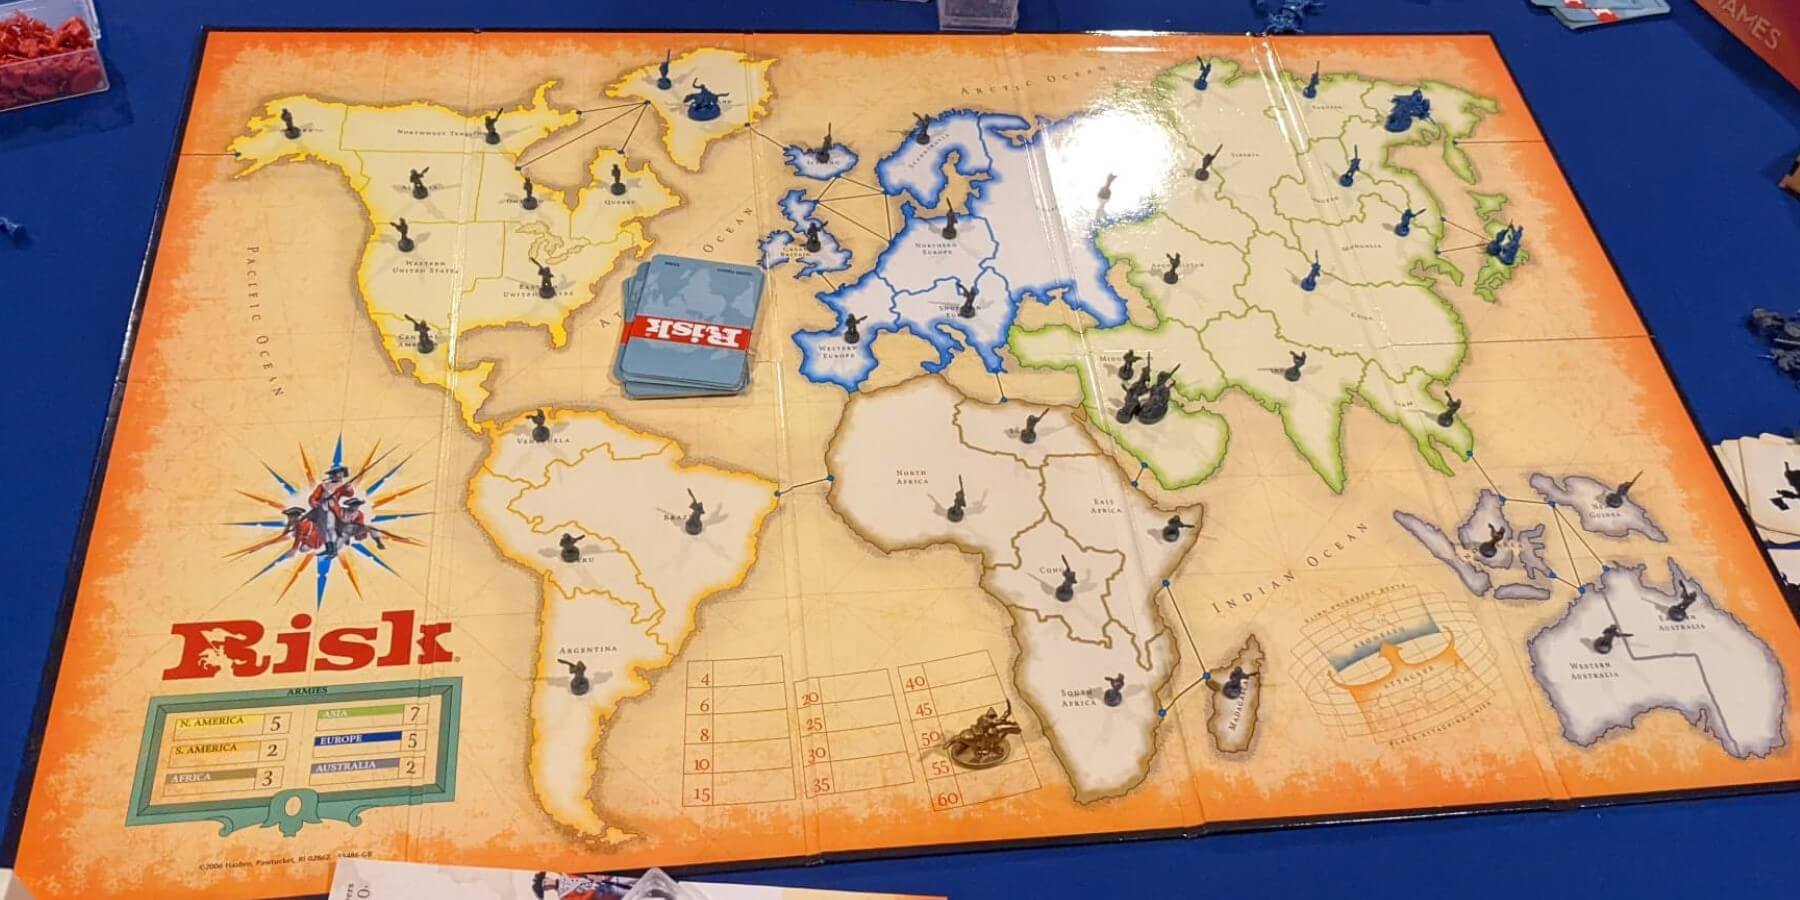 Risk board game that has just started